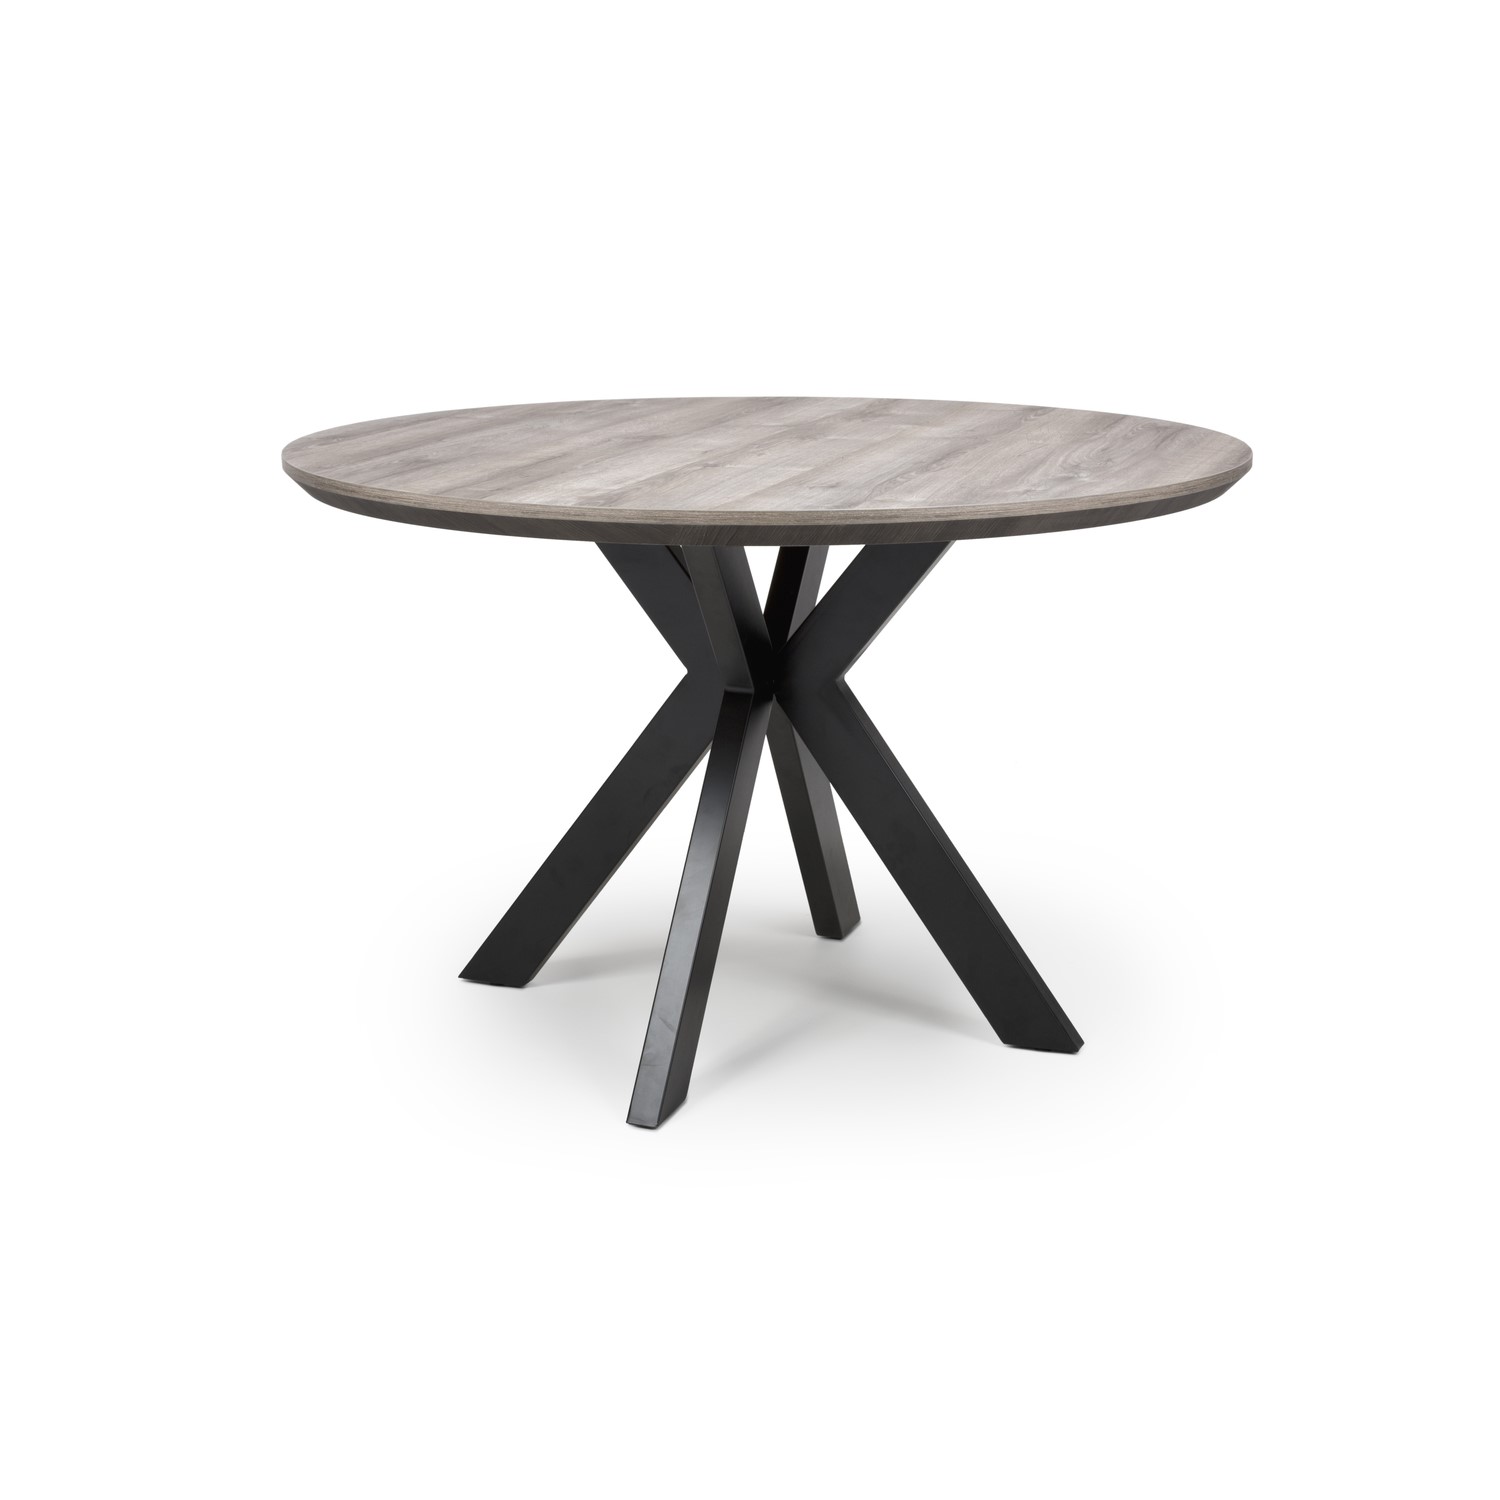 Photo of Round grey wood dining table - seats 6 - liberty